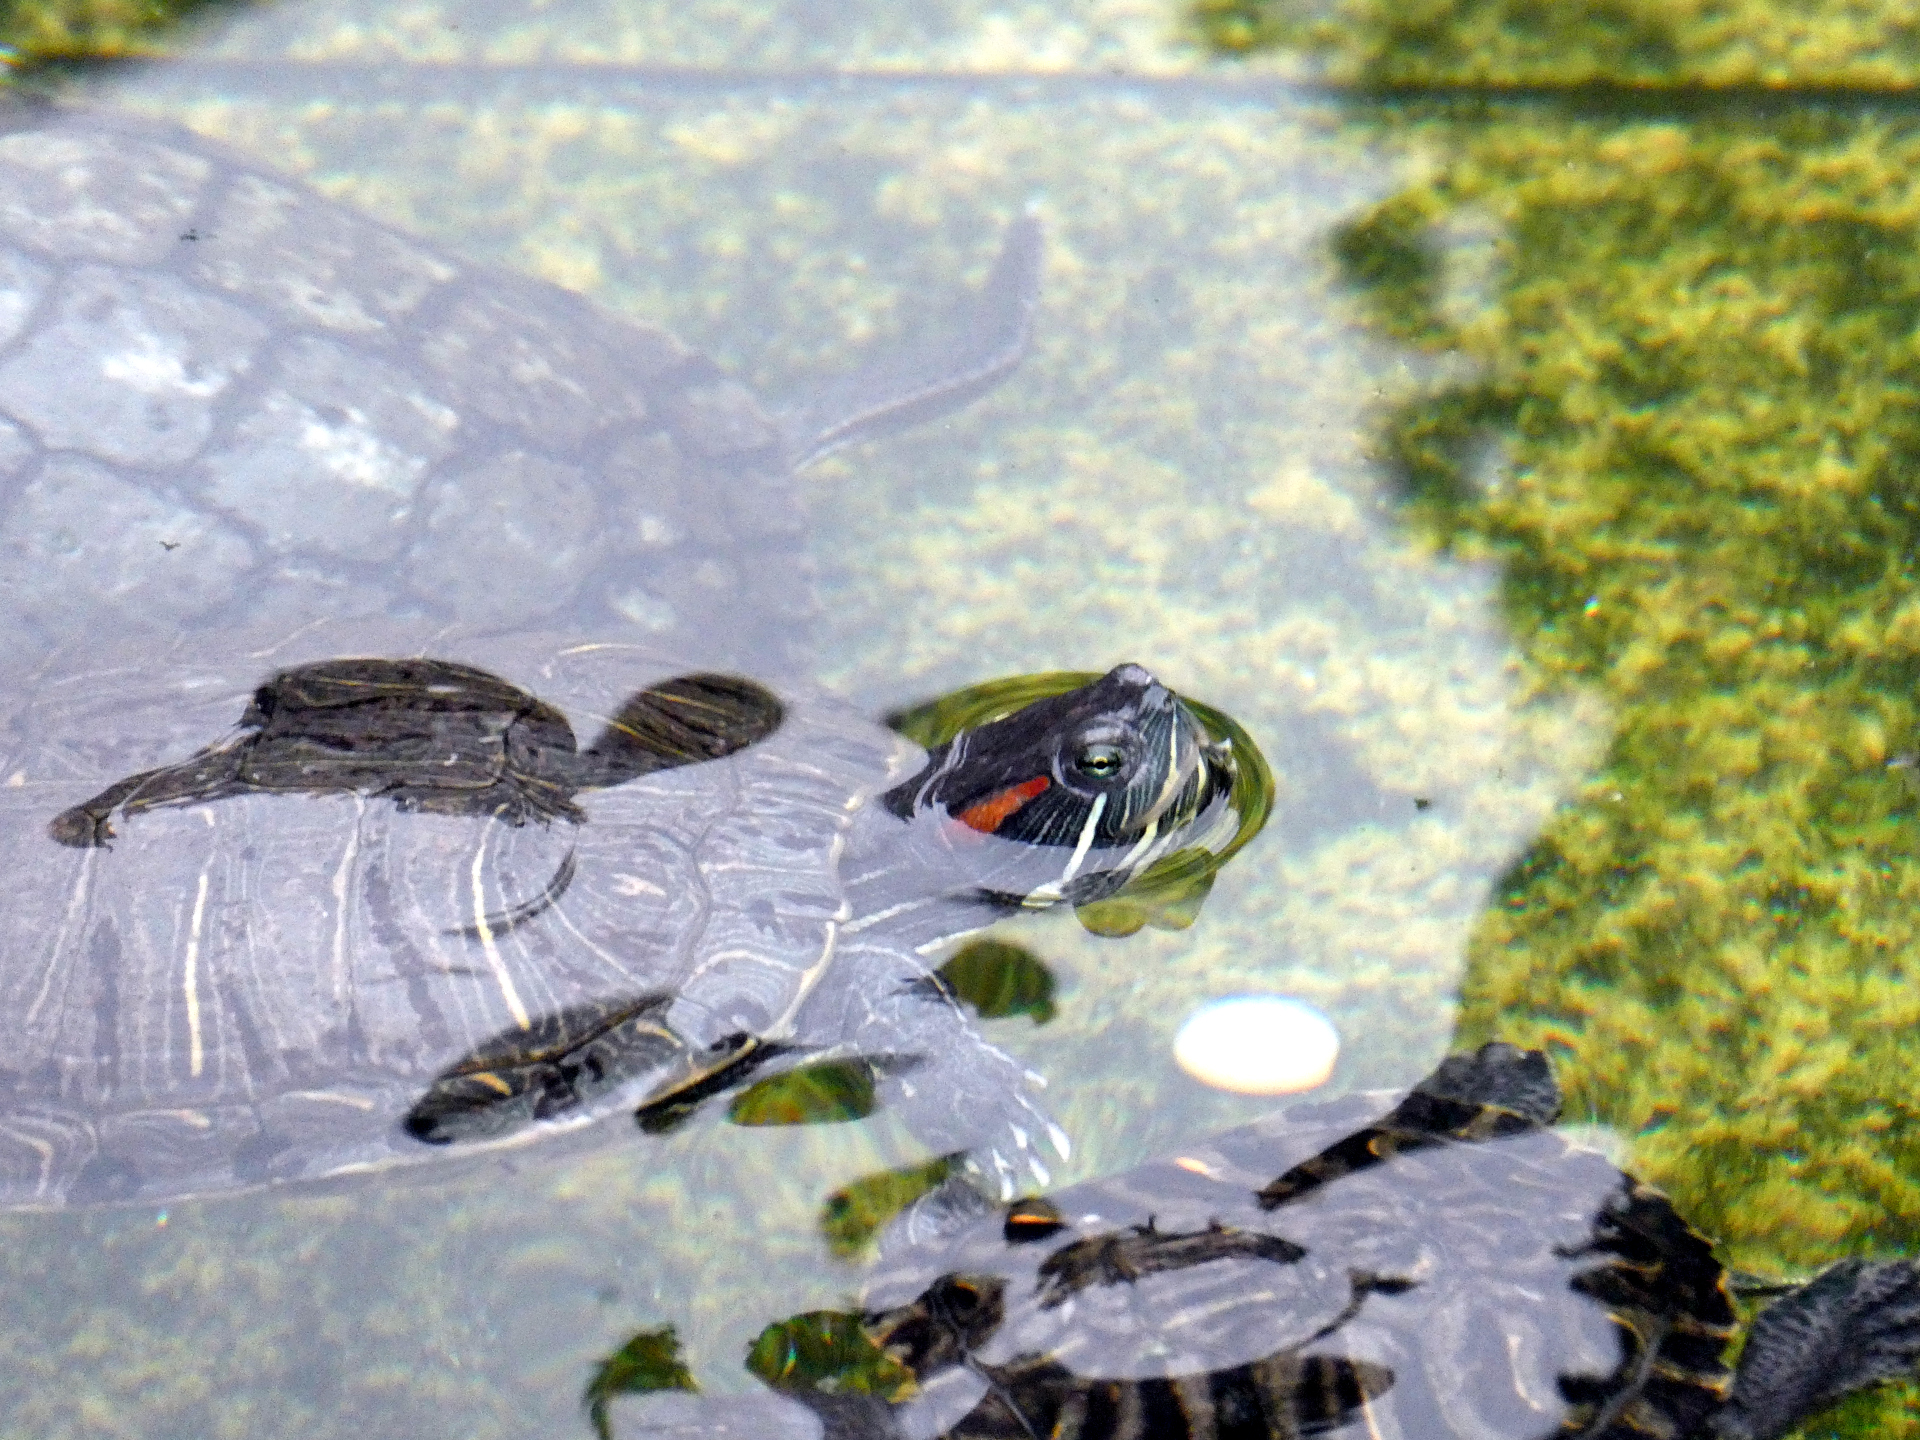 A turtle swimming in a pond